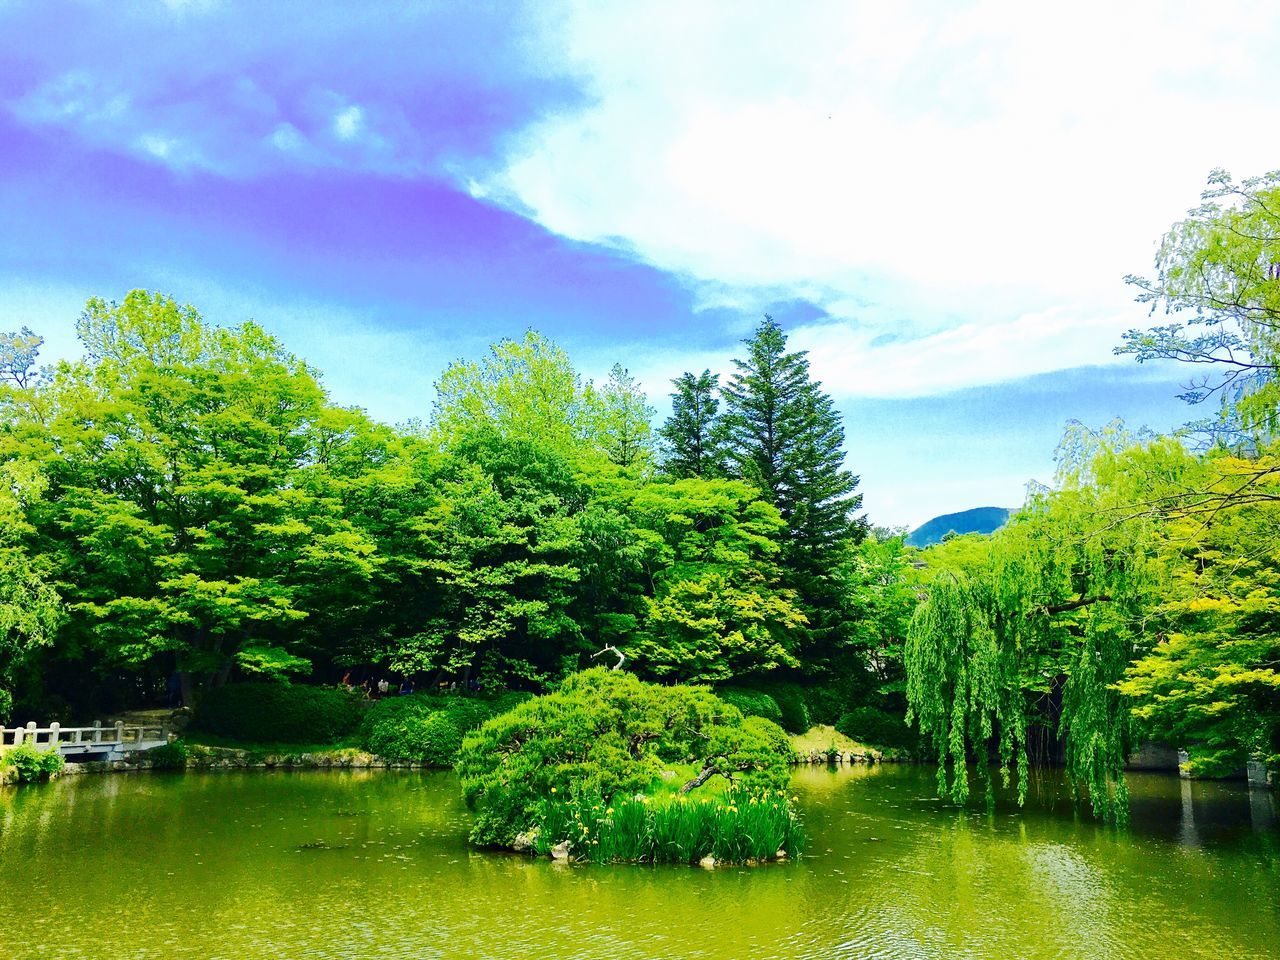 tree, water, sky, green color, tranquility, tranquil scene, growth, beauty in nature, nature, scenics, waterfront, lake, river, cloud - sky, lush foliage, cloud, green, day, idyllic, outdoors